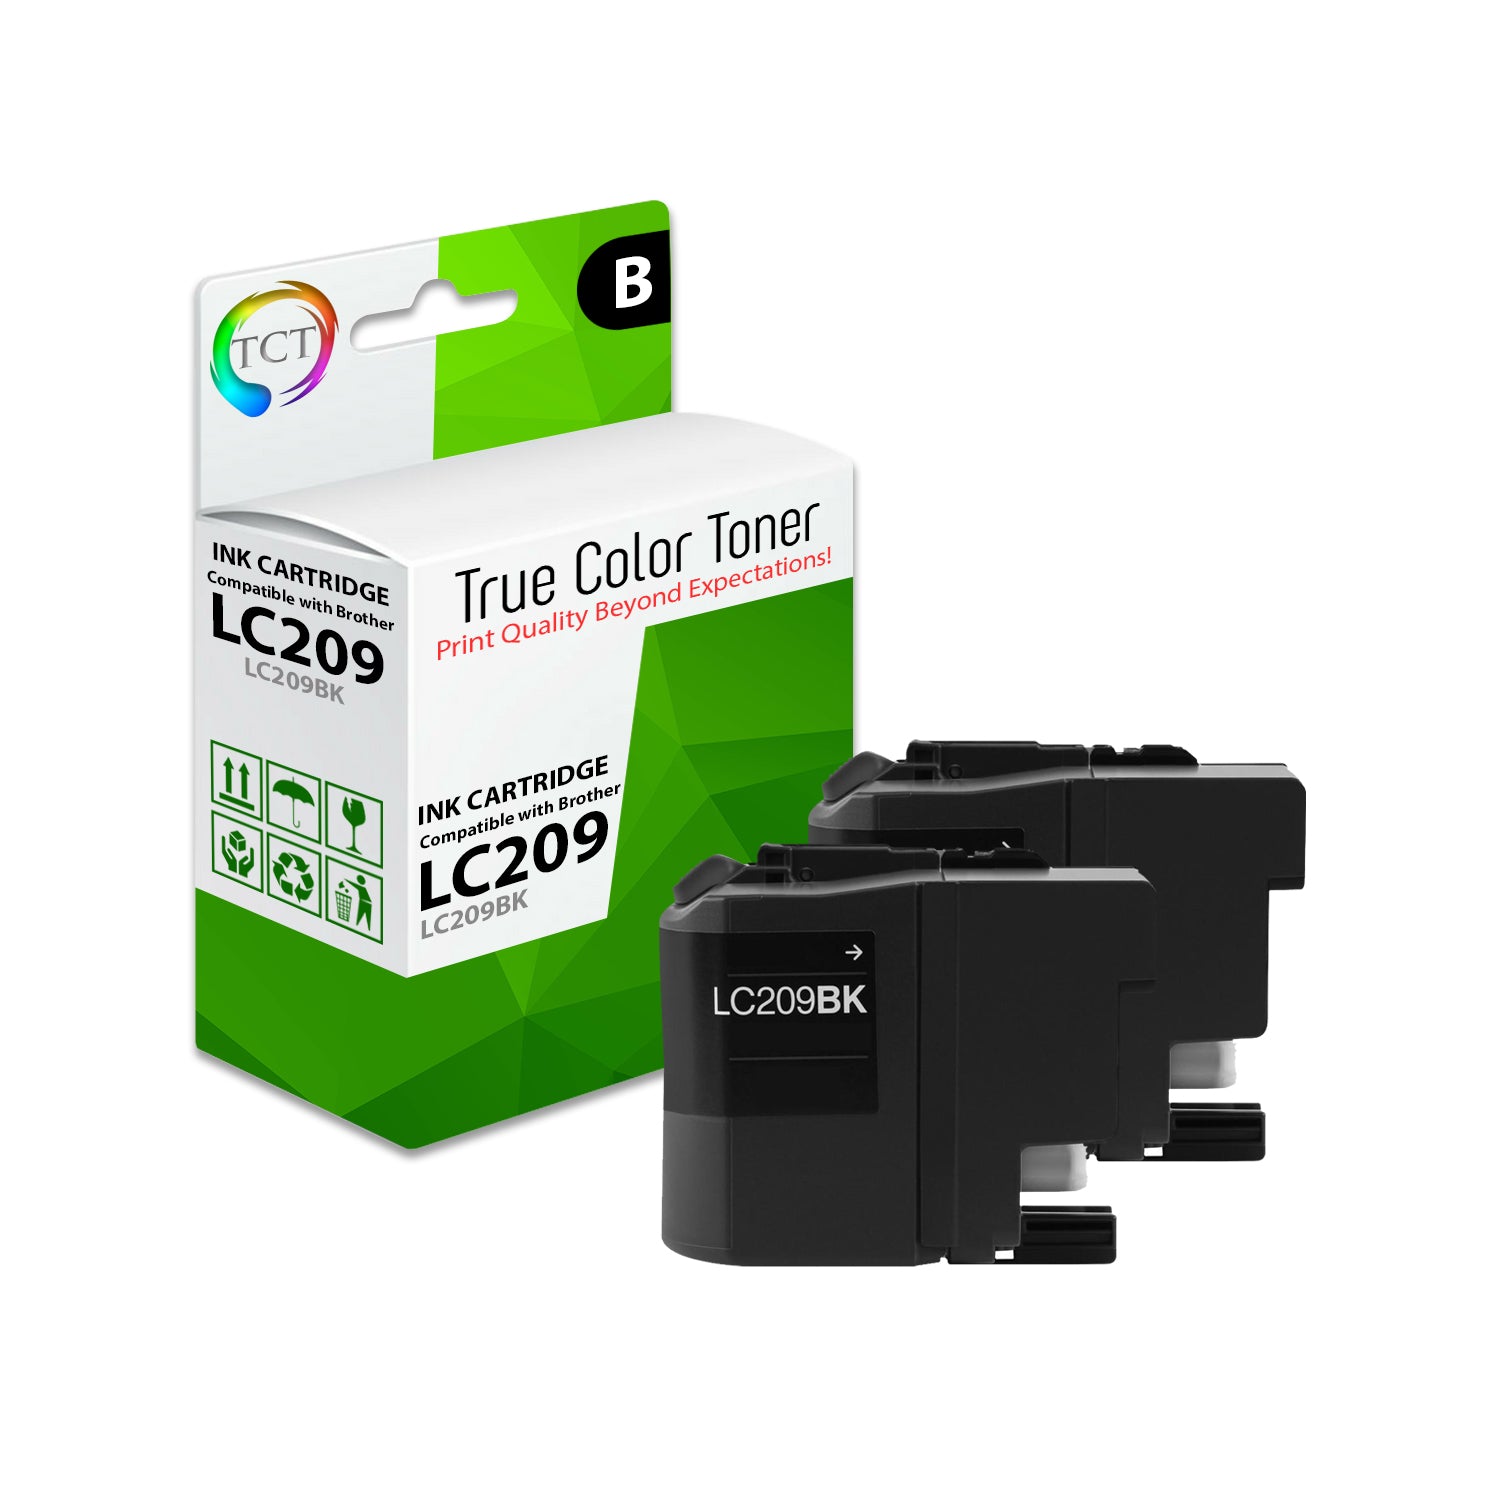 TCT Compatible Super HY Ink Cartridge Replacement for the Brother LC209 Series - 2 Pack Black